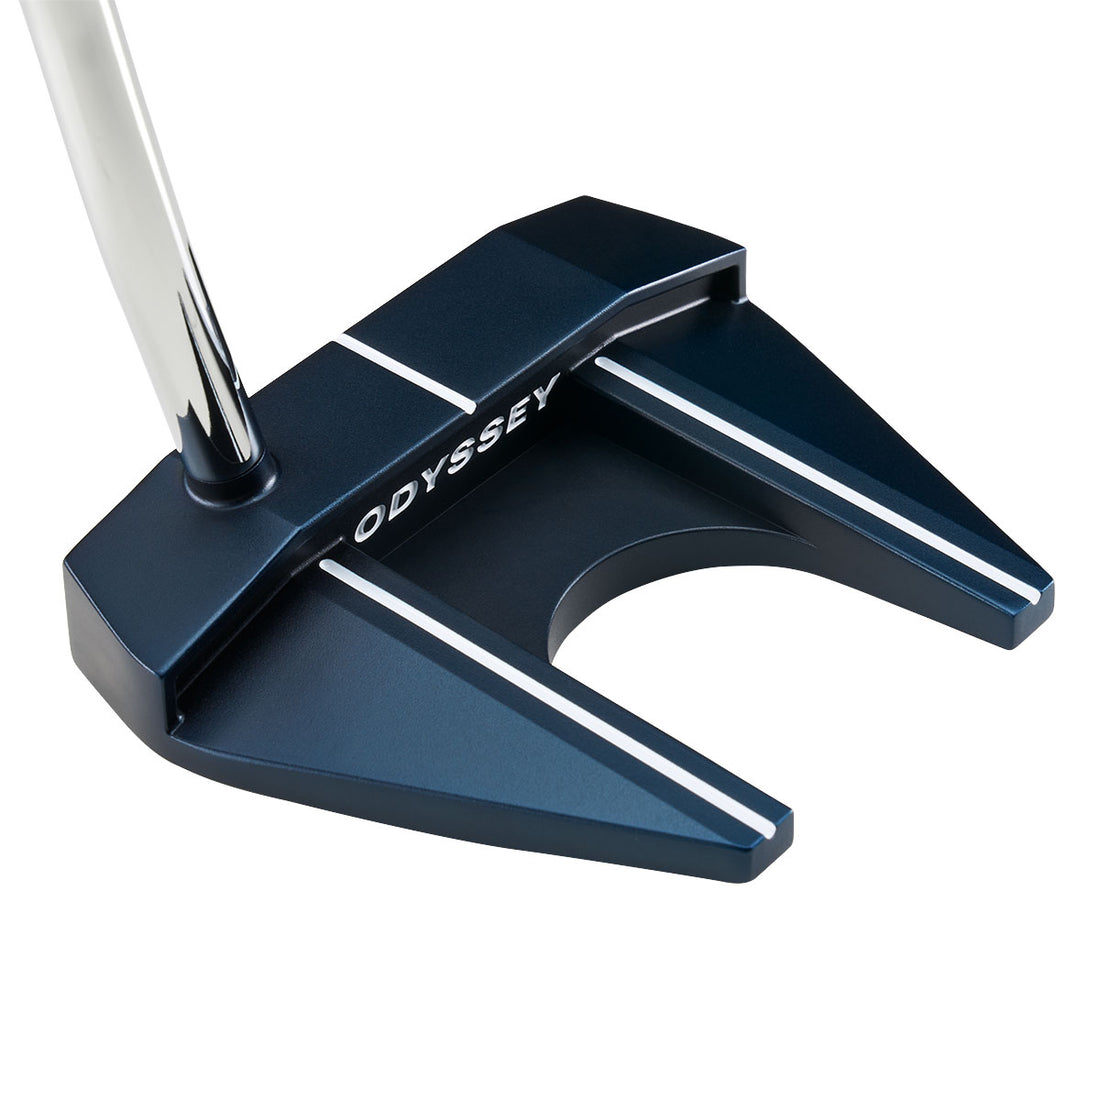 ODYSSEY Ai ONE CRUISER #7 DOUBLE BEND PUTTER